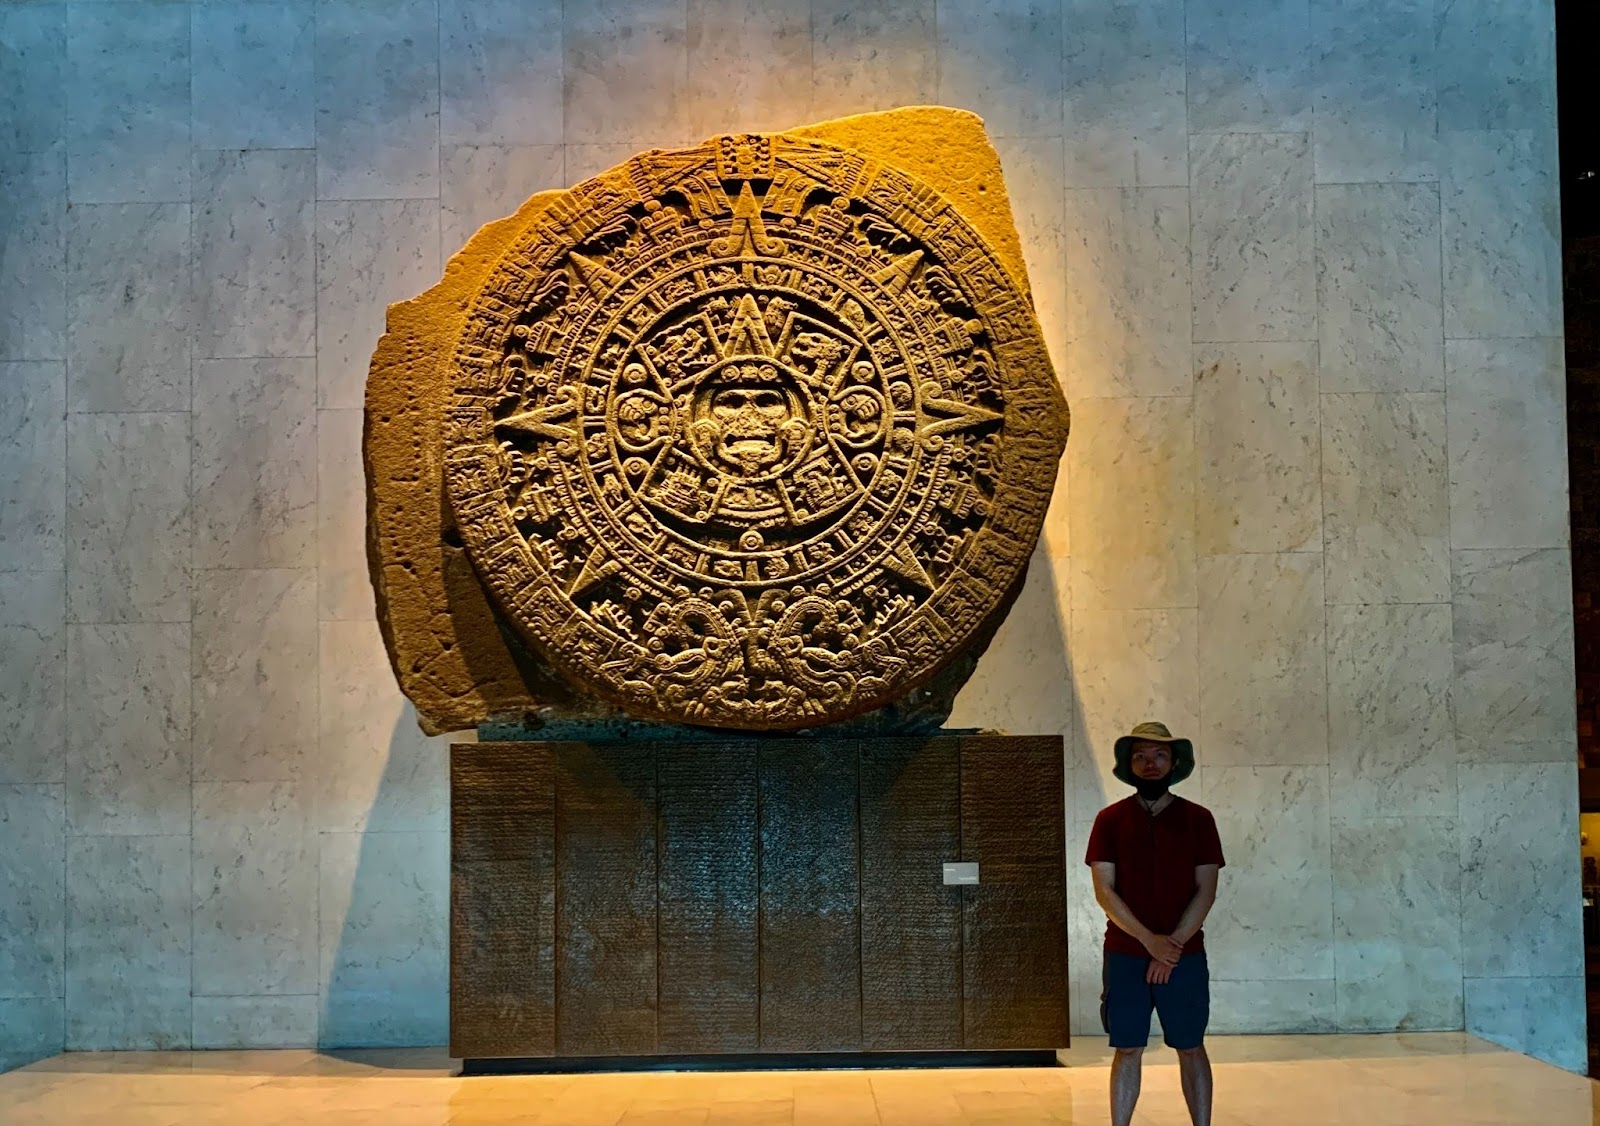 Aztec Sun Stone sculpture found in Mexico City's National Anthropology Museum